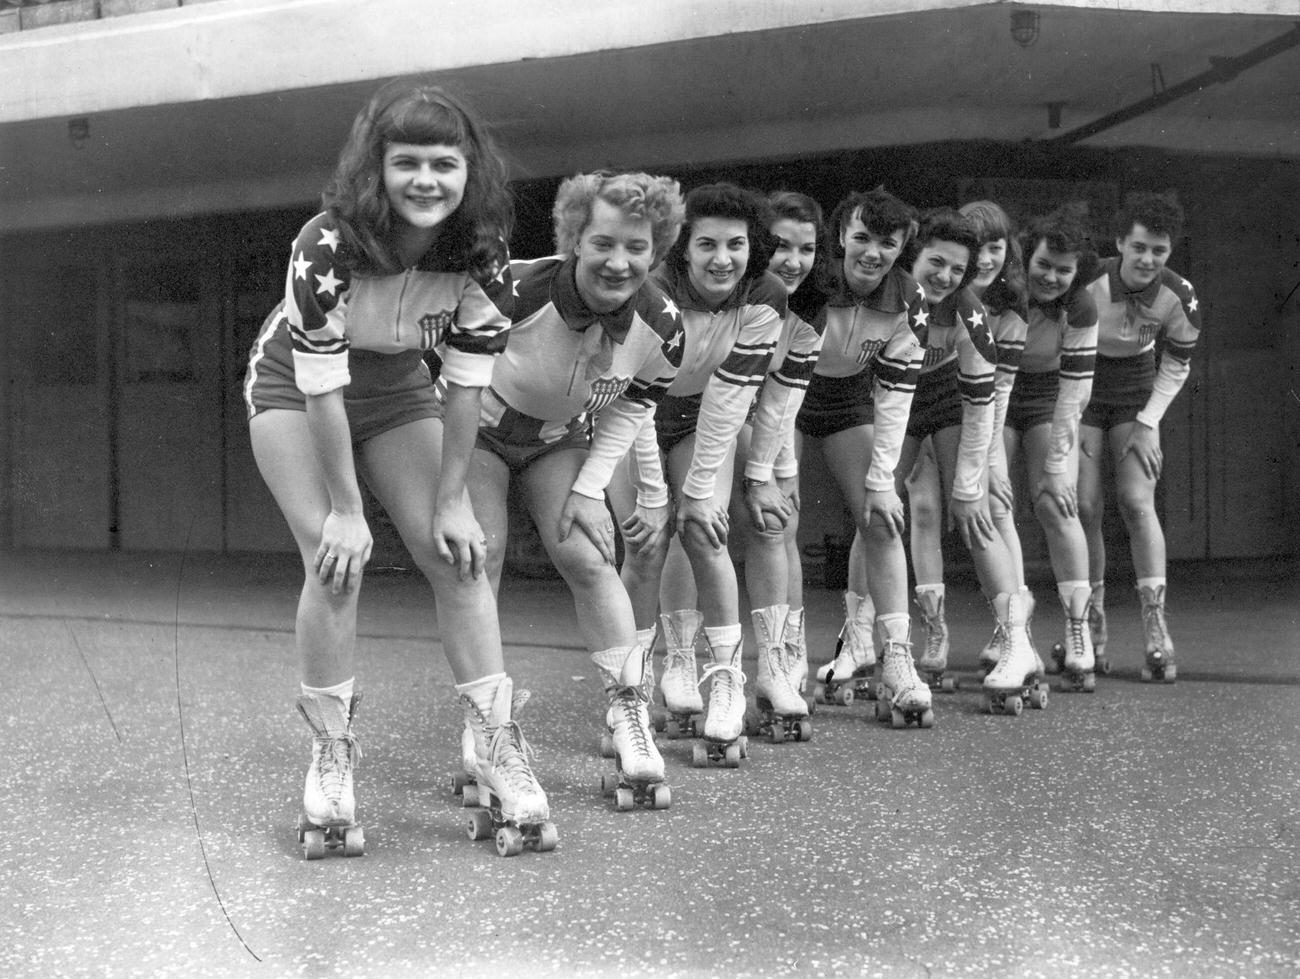 New York Chiefs' Girls Outside Haringey Arena Before Roller Derby, London, 1953